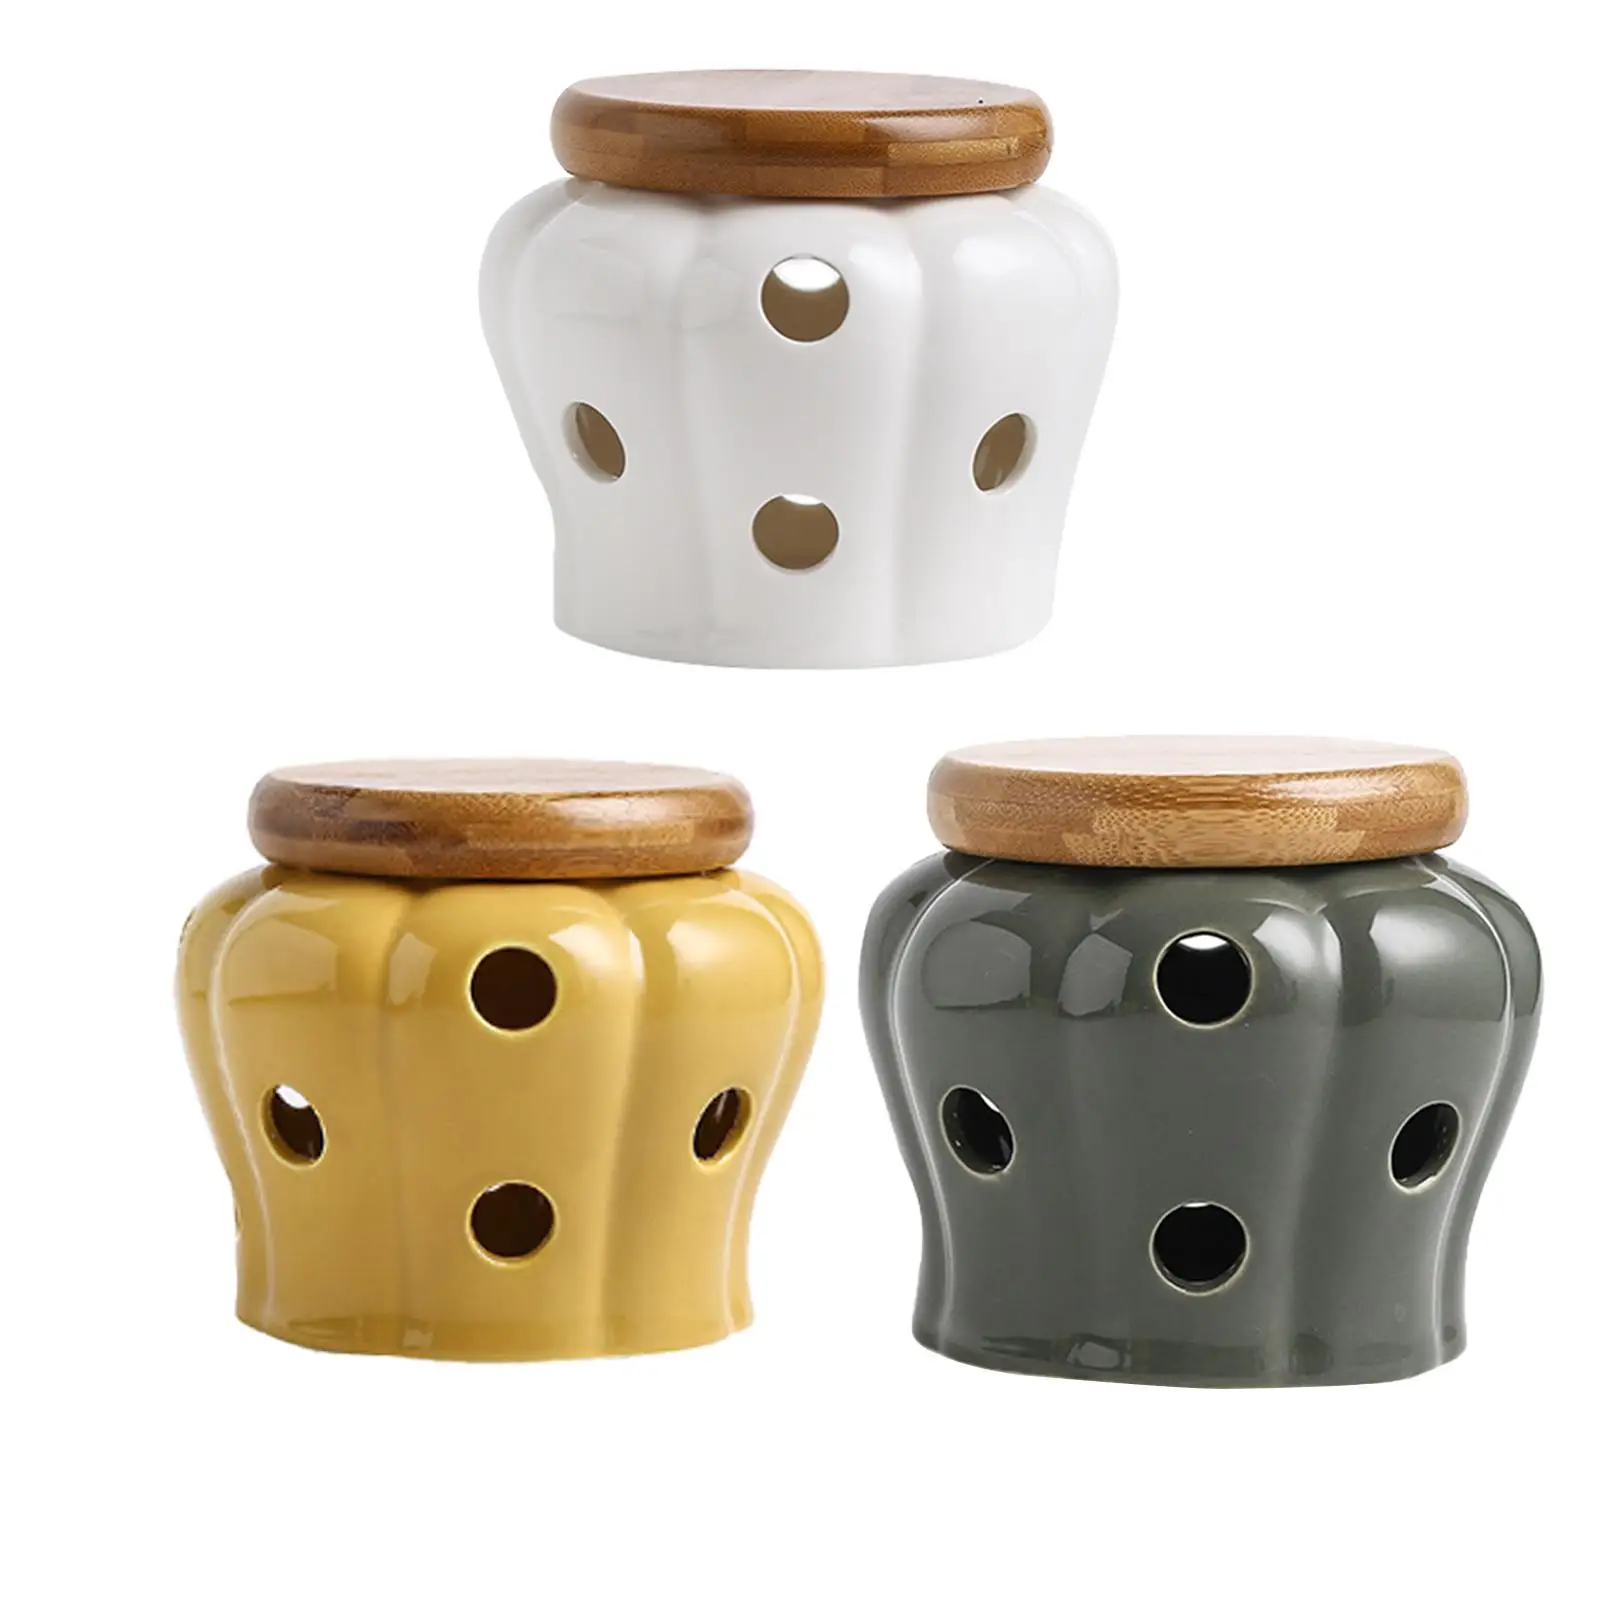 Japanese Style Ceramic Garlic Keeper with Lid Vented Hollow Pumpkin Shape Round Garlic Cellar Pot Storage Container Collection